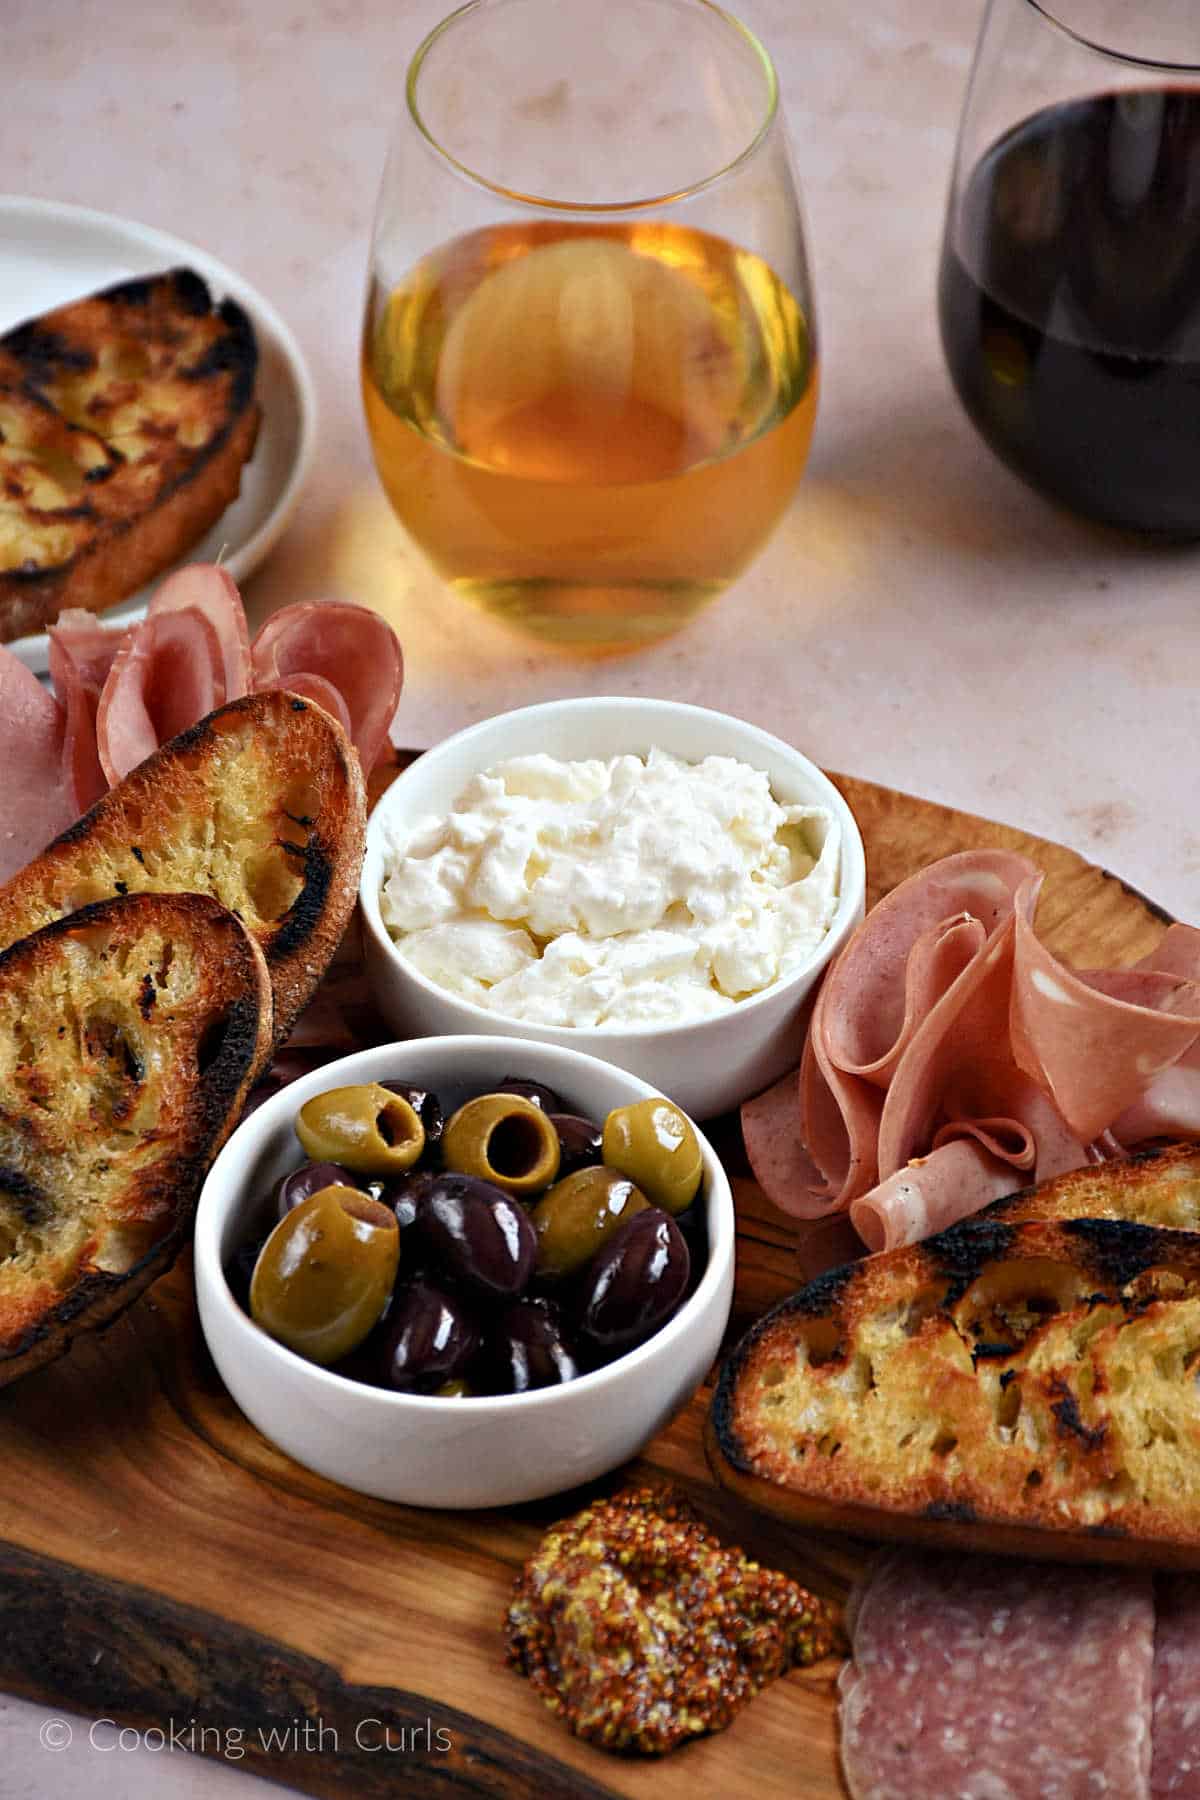 Burrata cheese and mixed olives in bowls surrounded by Italian meats and grilled bread on a wood board.